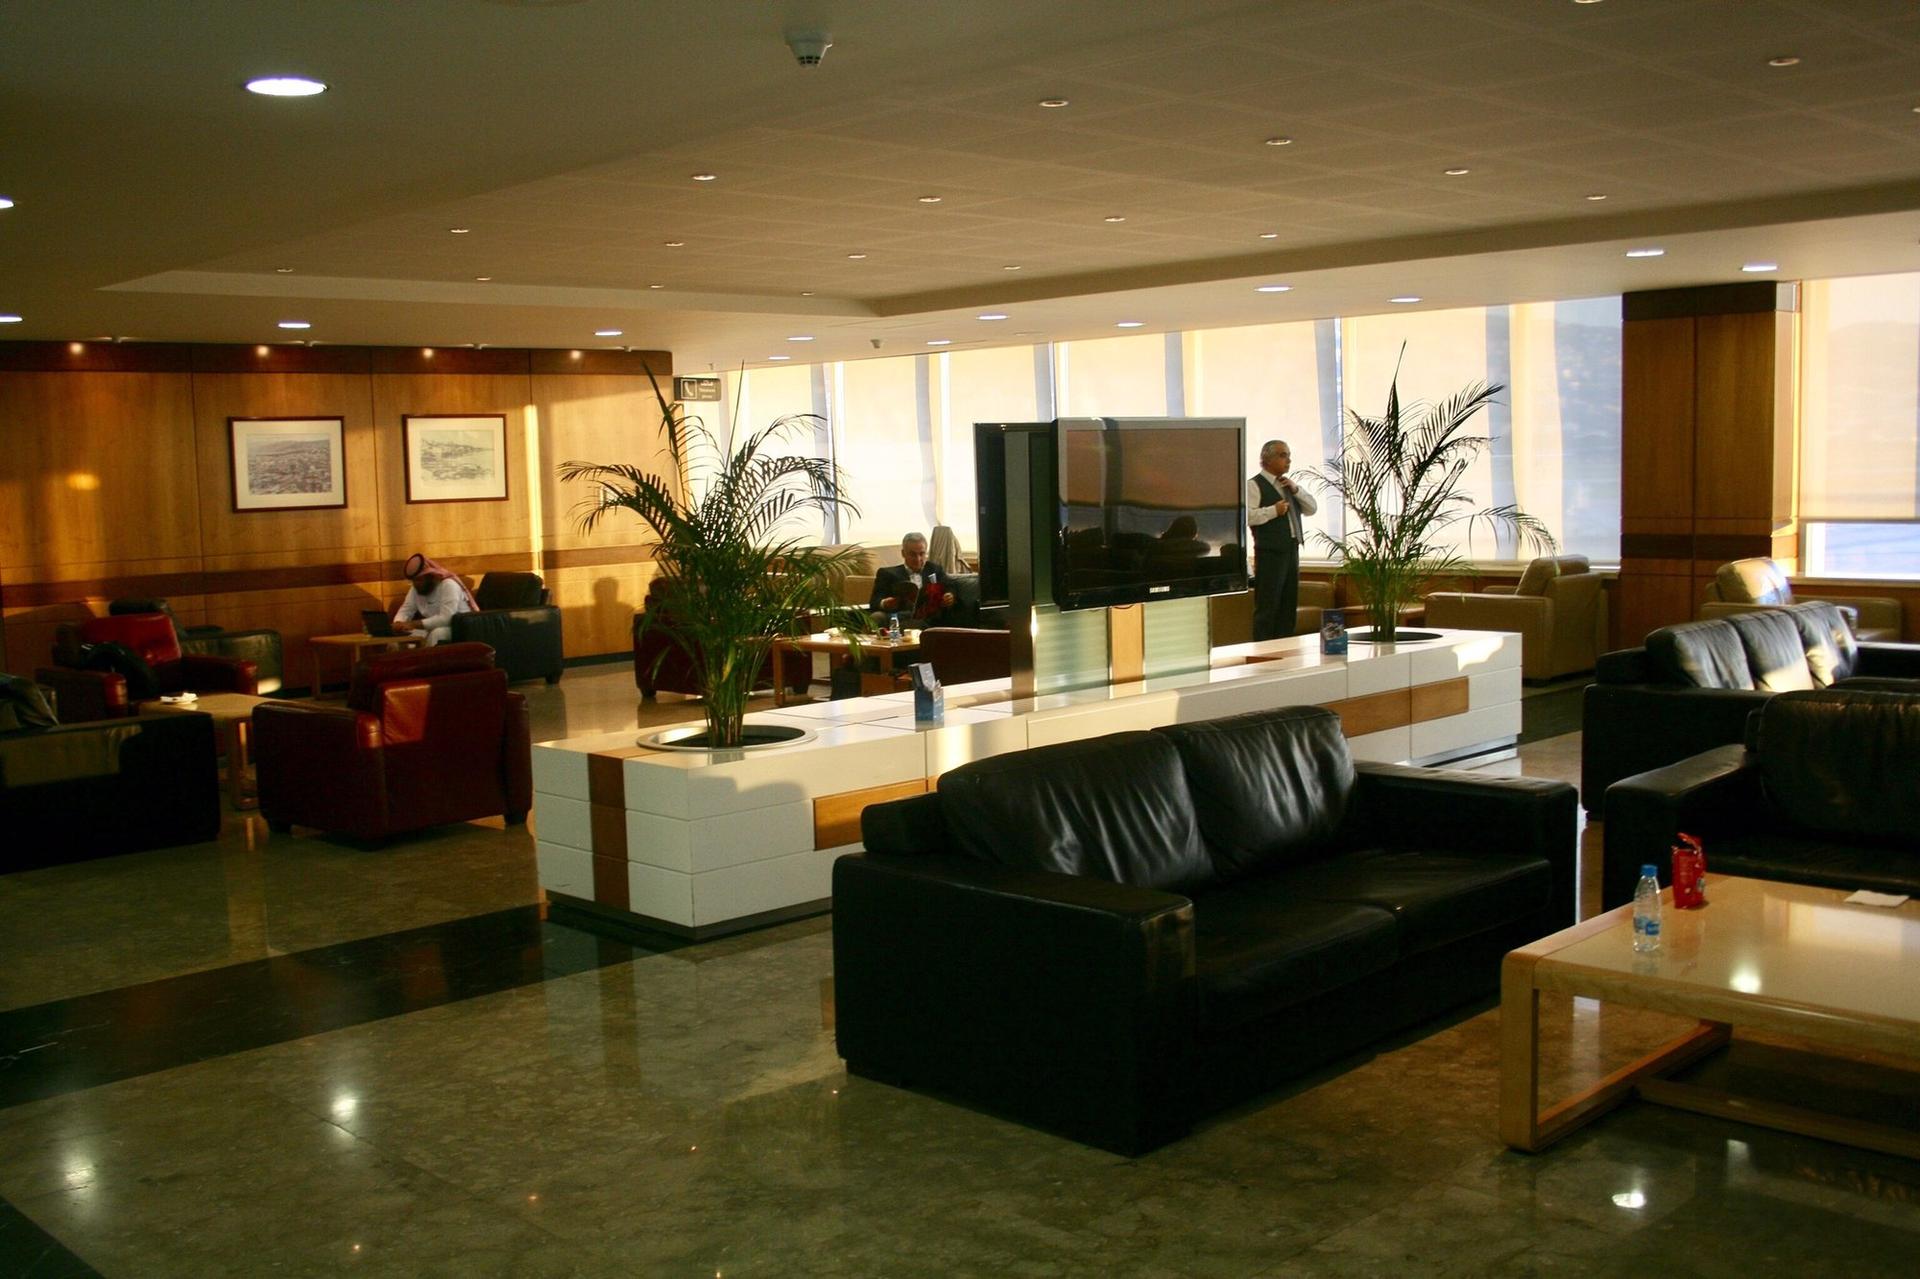 Middle East Airlines Cedar Lounge image 9 of 18